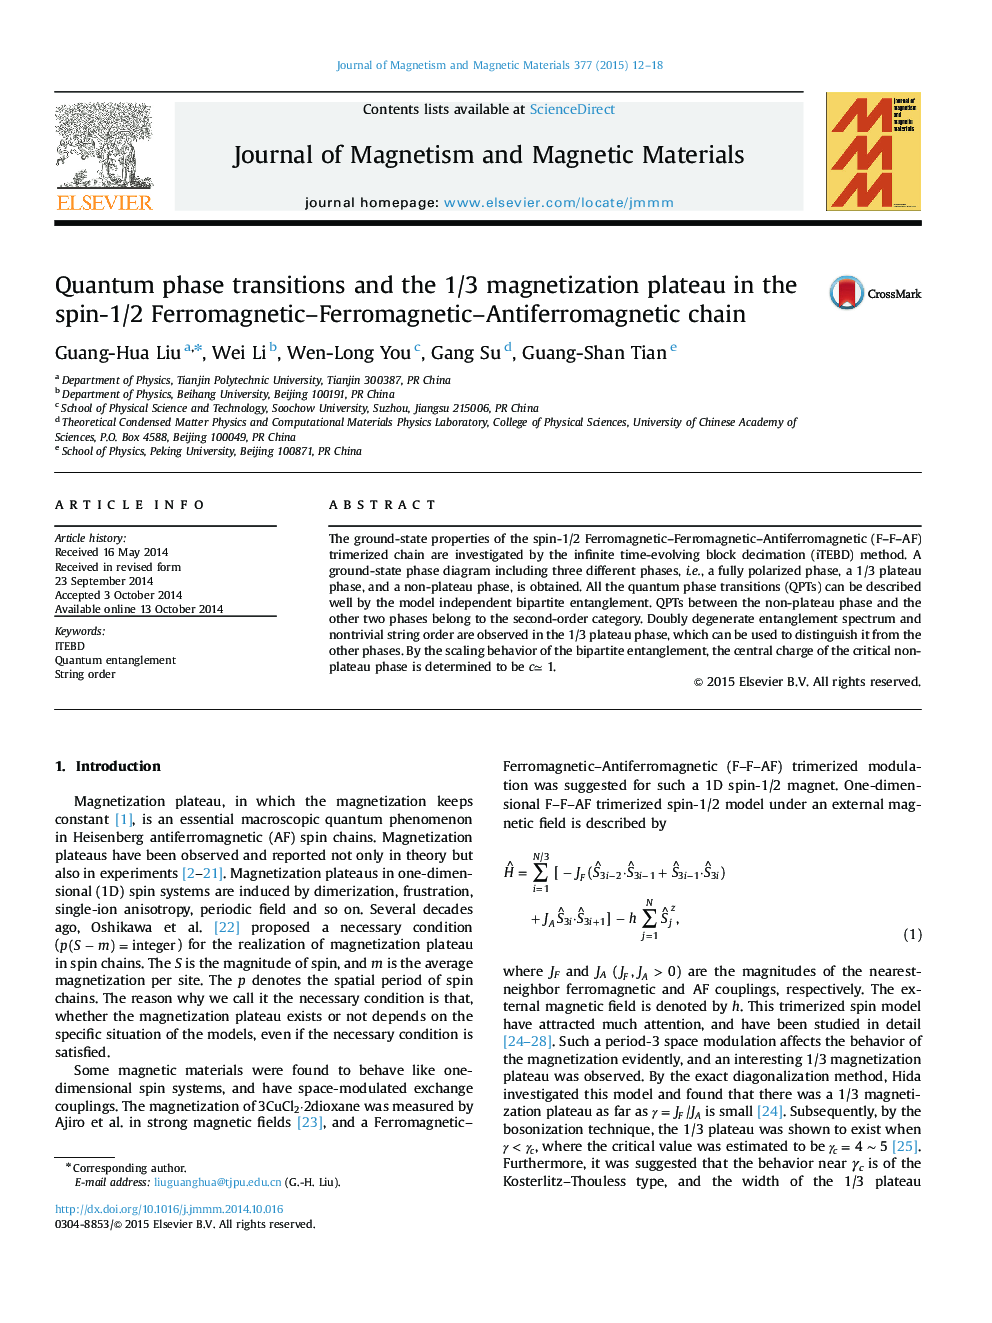 Quantum phase transitions and the 1/3 magnetization plateau in the spin-1/2 Ferromagnetic-Ferromagnetic-Antiferromagnetic chain